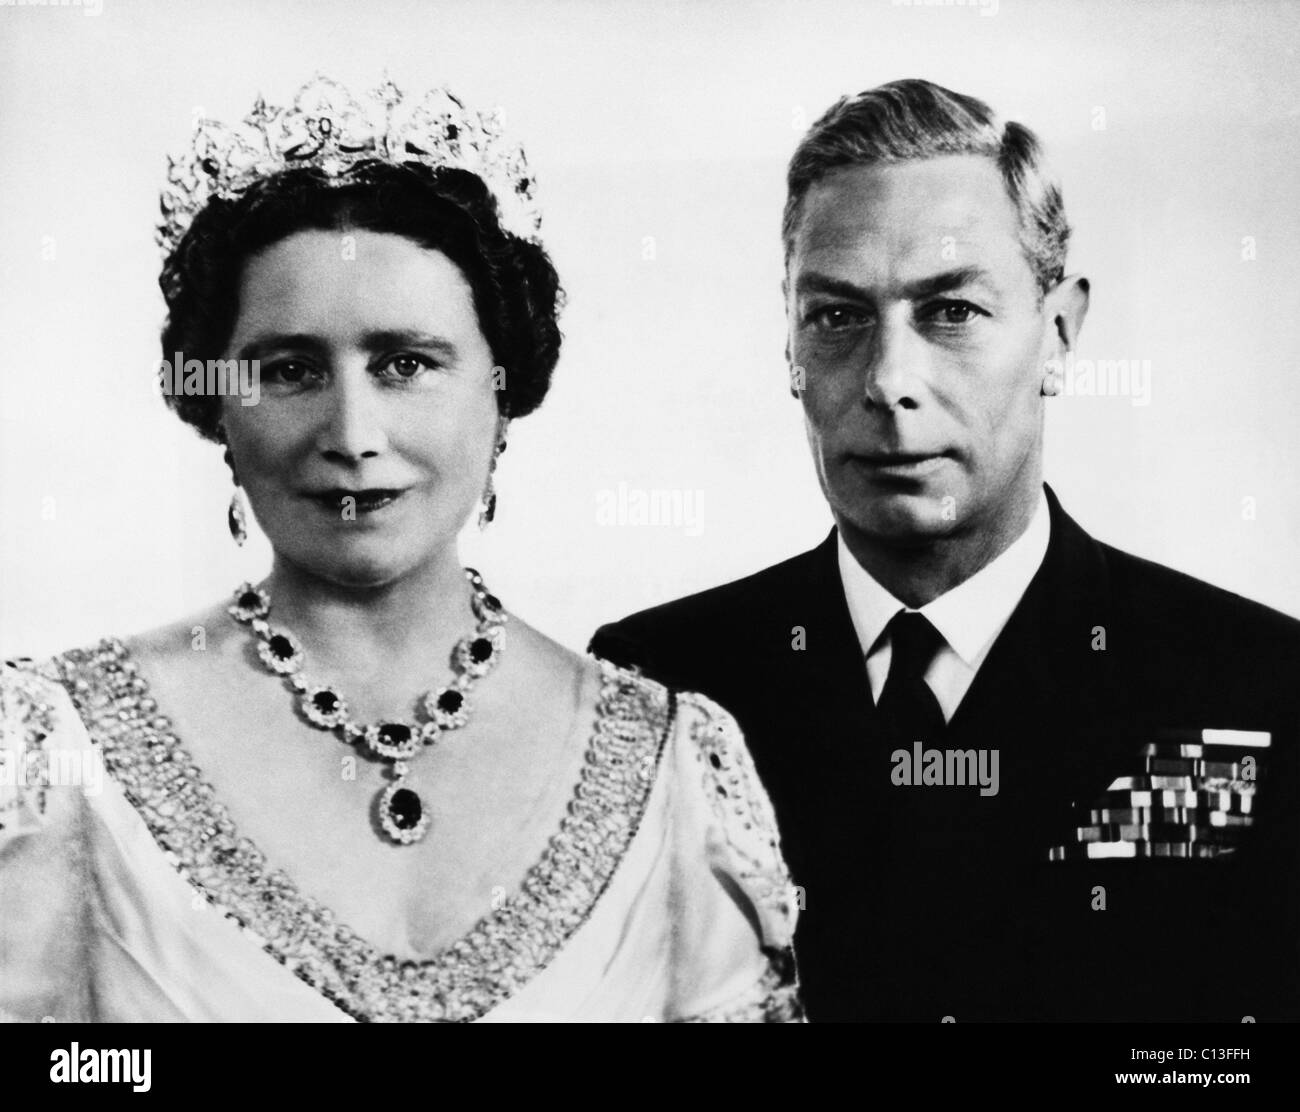 British Royalty. British Queen Elizabeth (future Queen Mother) and King George VI of England, circa 1940s. Stock Photo